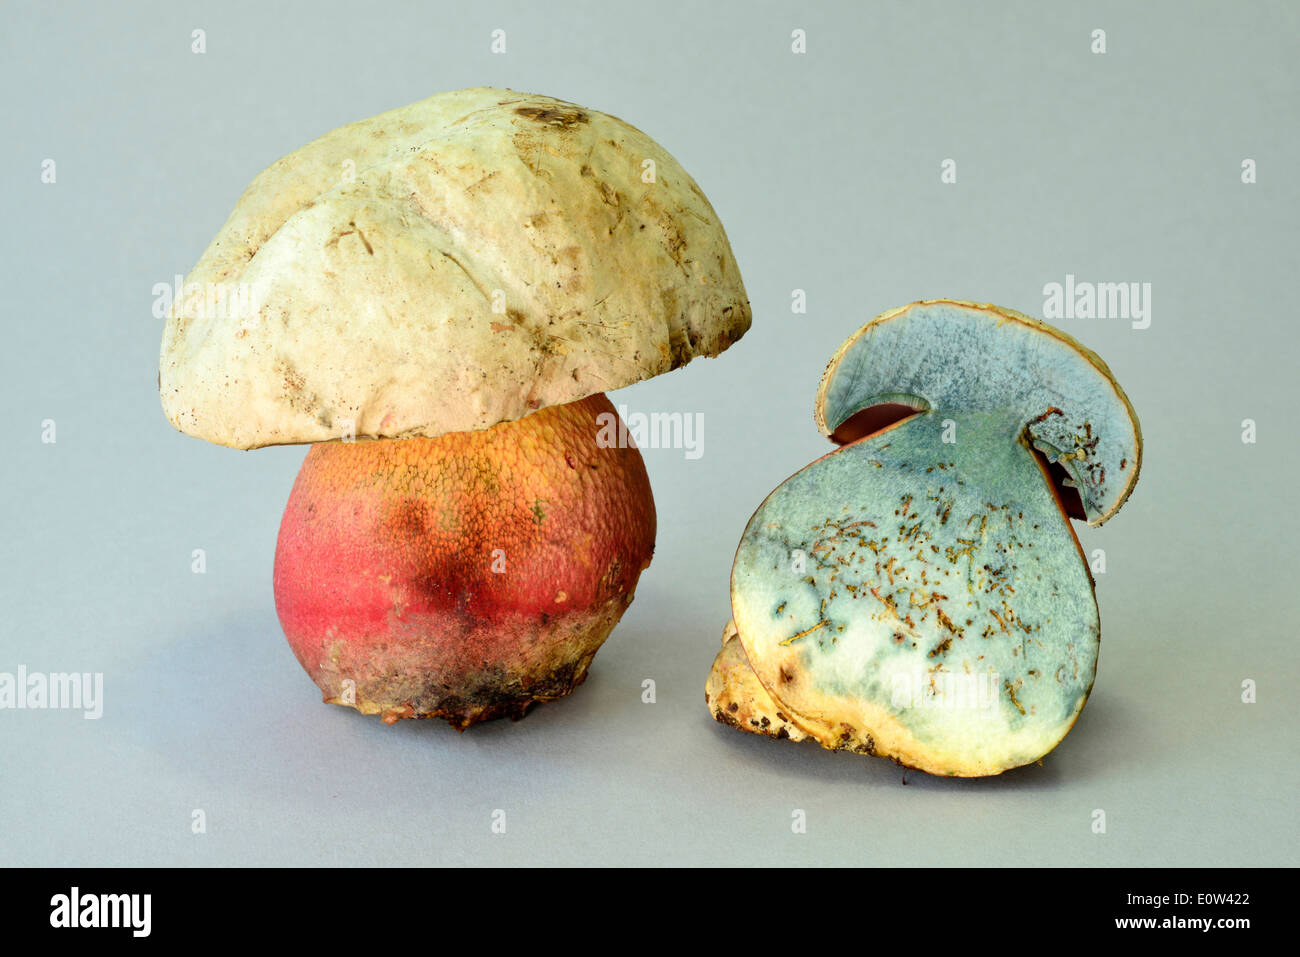 Devils Bolete, Satans Mushroom (Boletus satanas). Two toadstoals, one halved to show the typical blue coloration. Studio picture Stock Photo